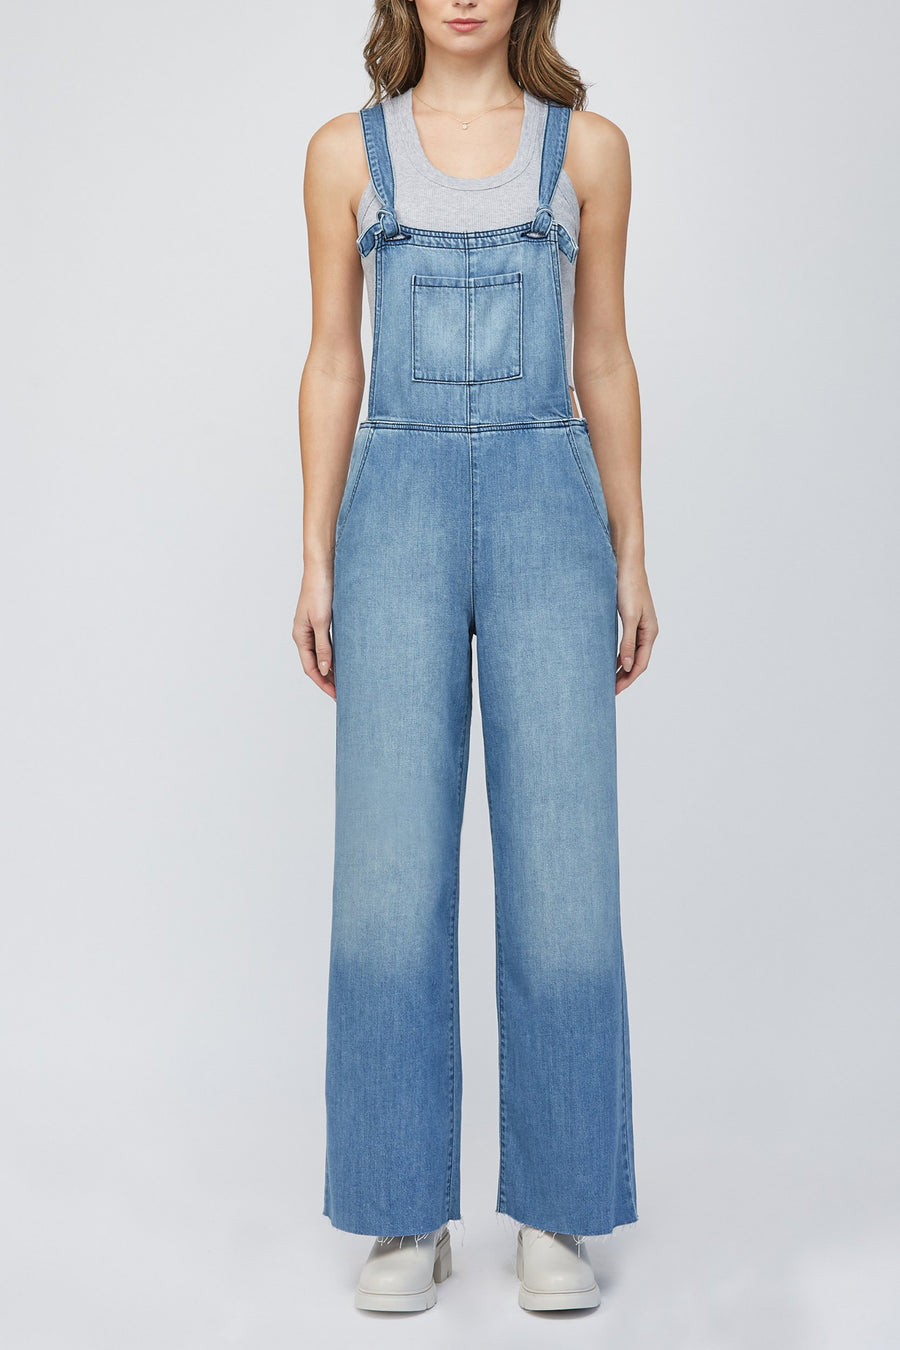 [DYLAN] MEDIUM WASH CLASSIC SUPER SOFT STRAIGHT OVERALL